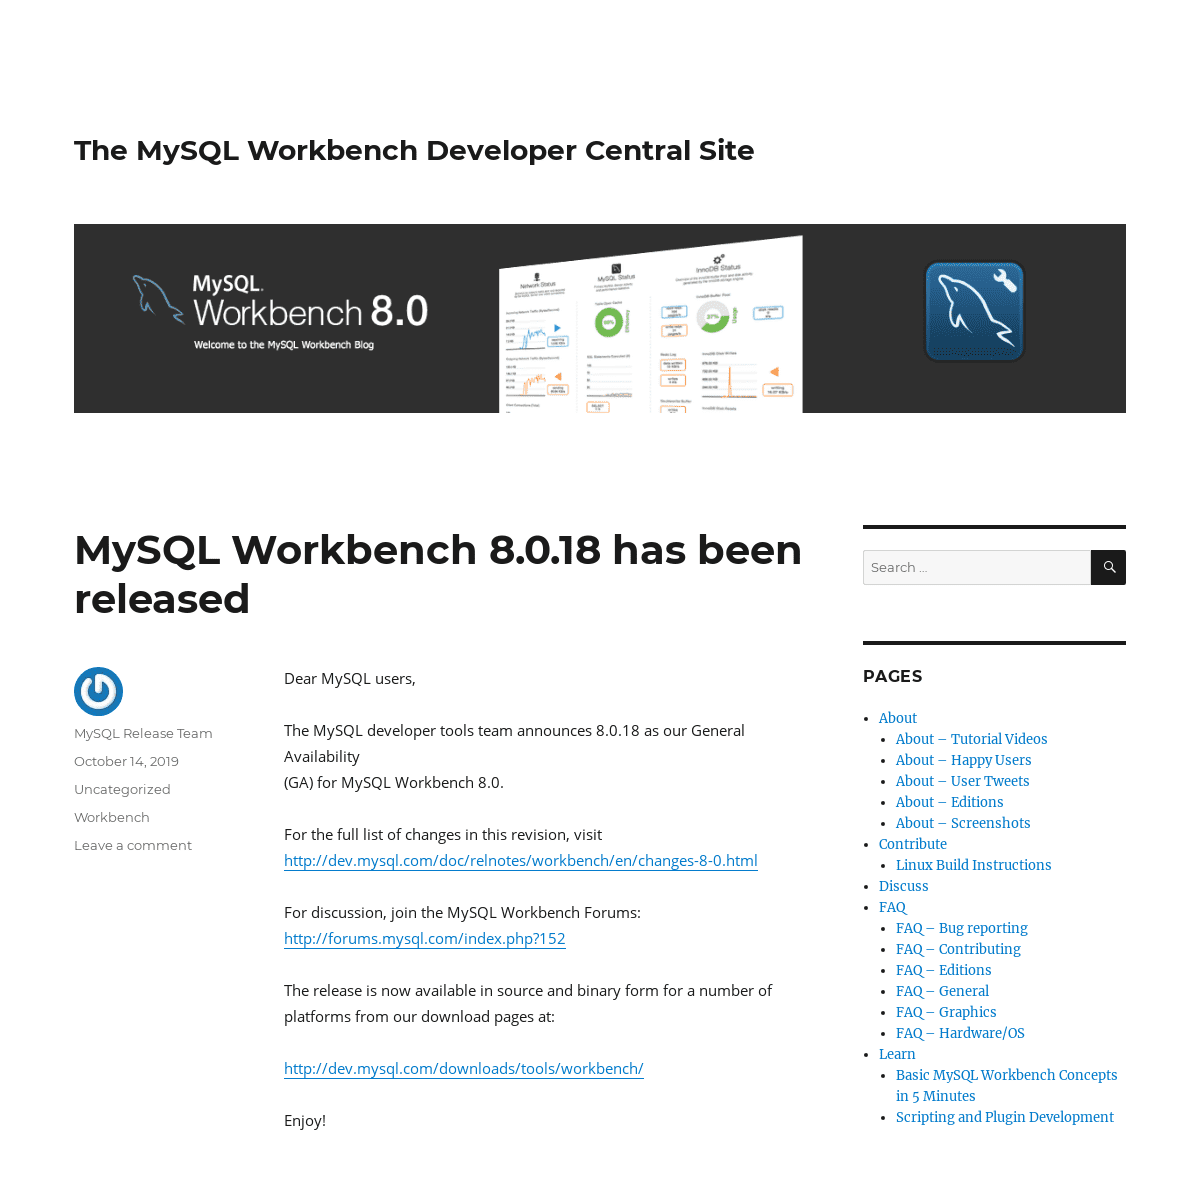 A complete backup of mysqlworkbench.org